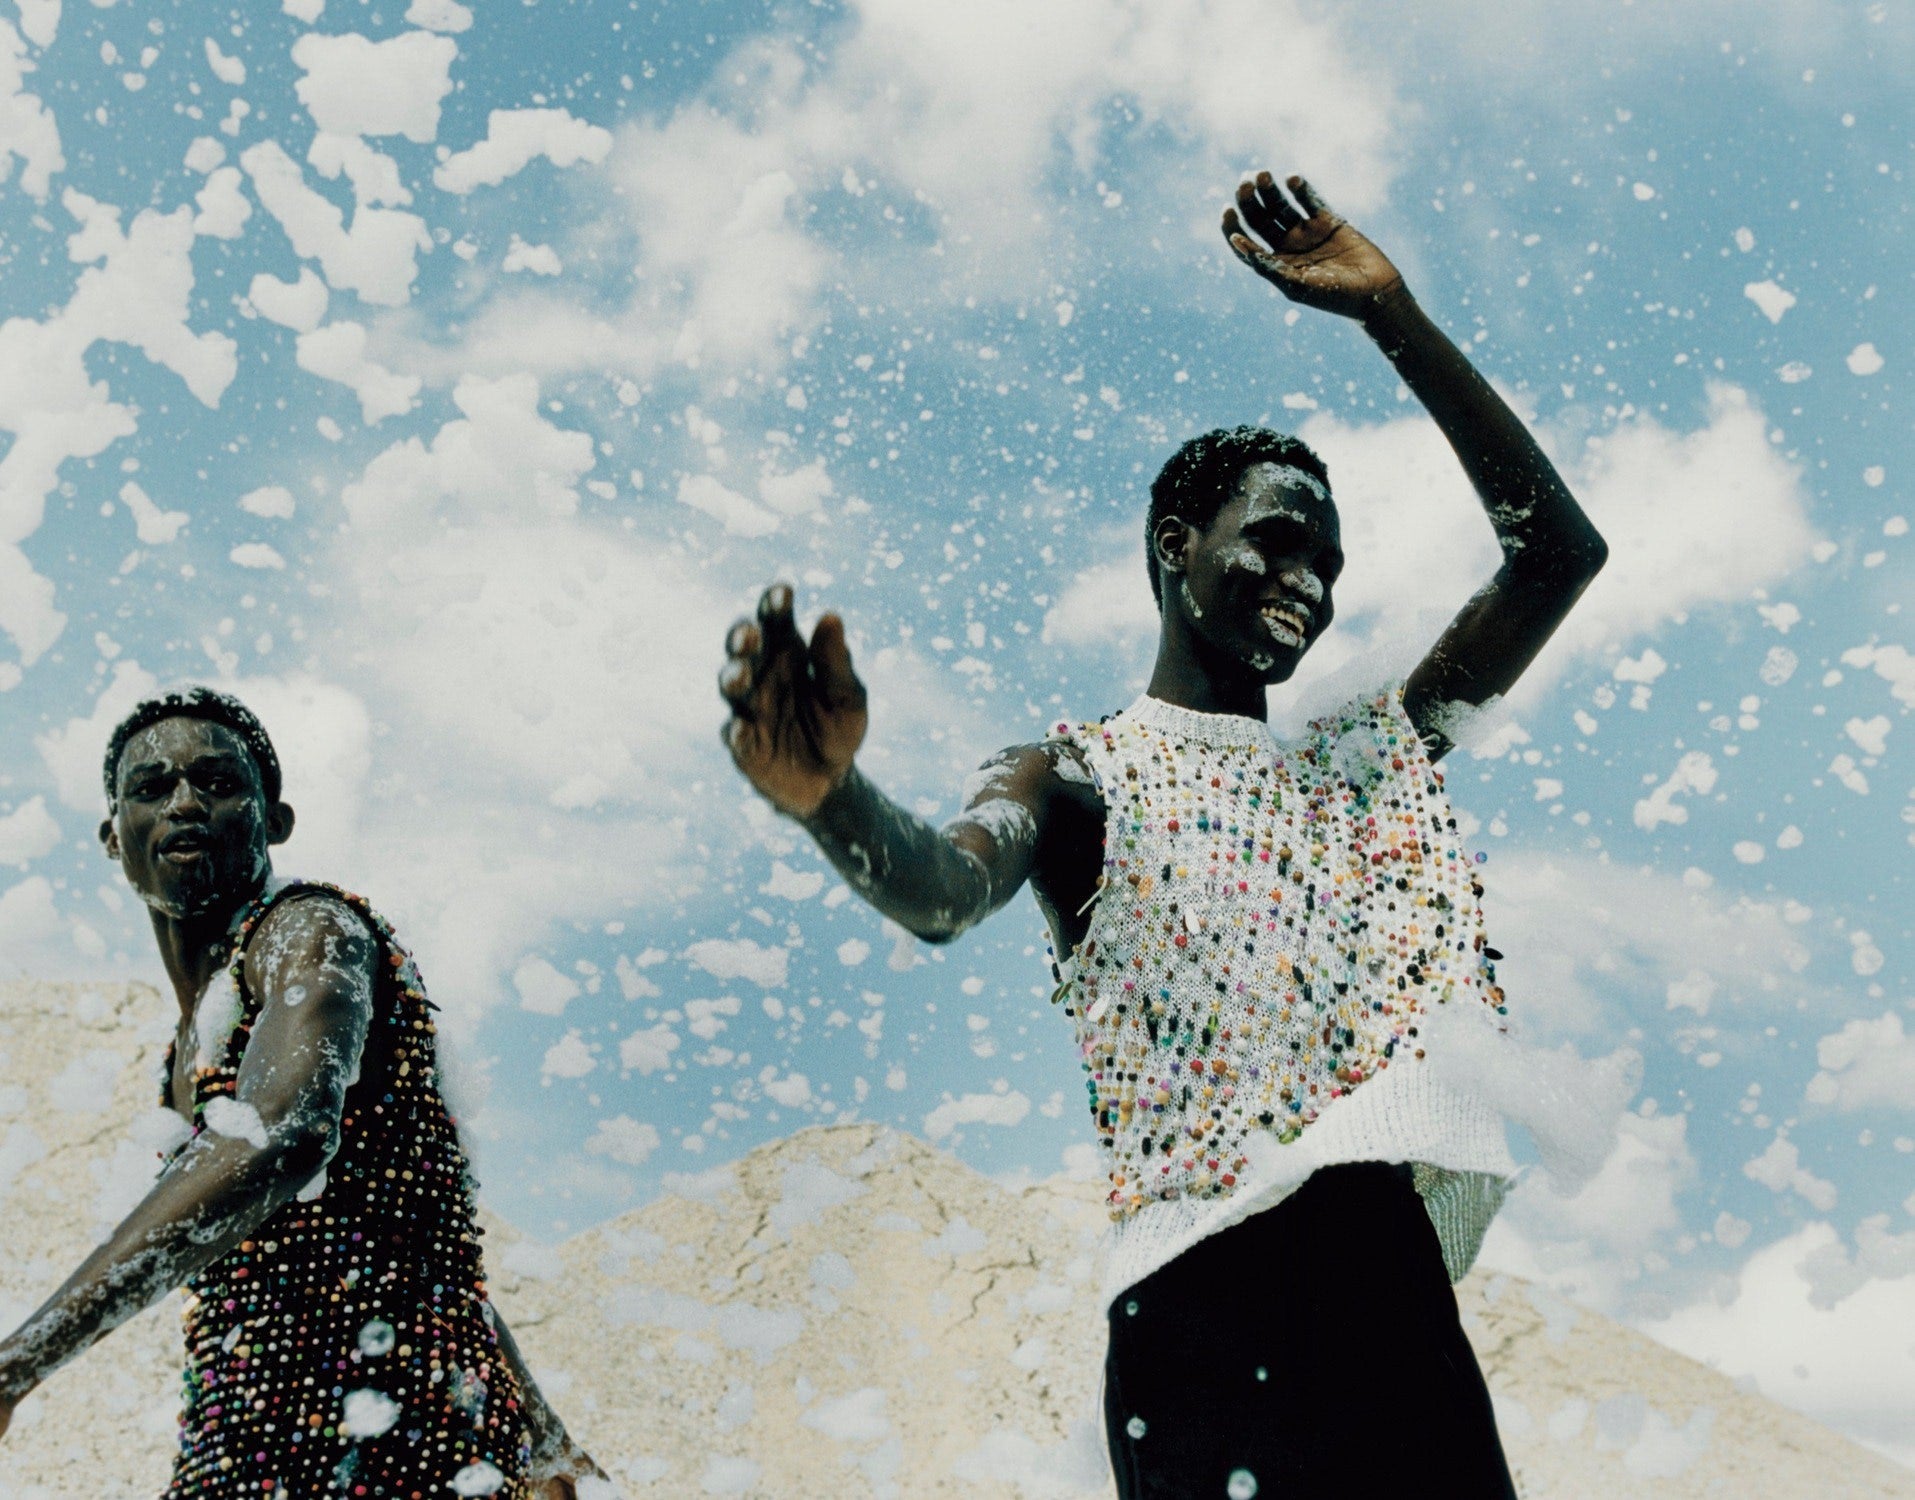 Two male models jumping and smiling with clouds of foam in the air against a blue sky by Jack Davison